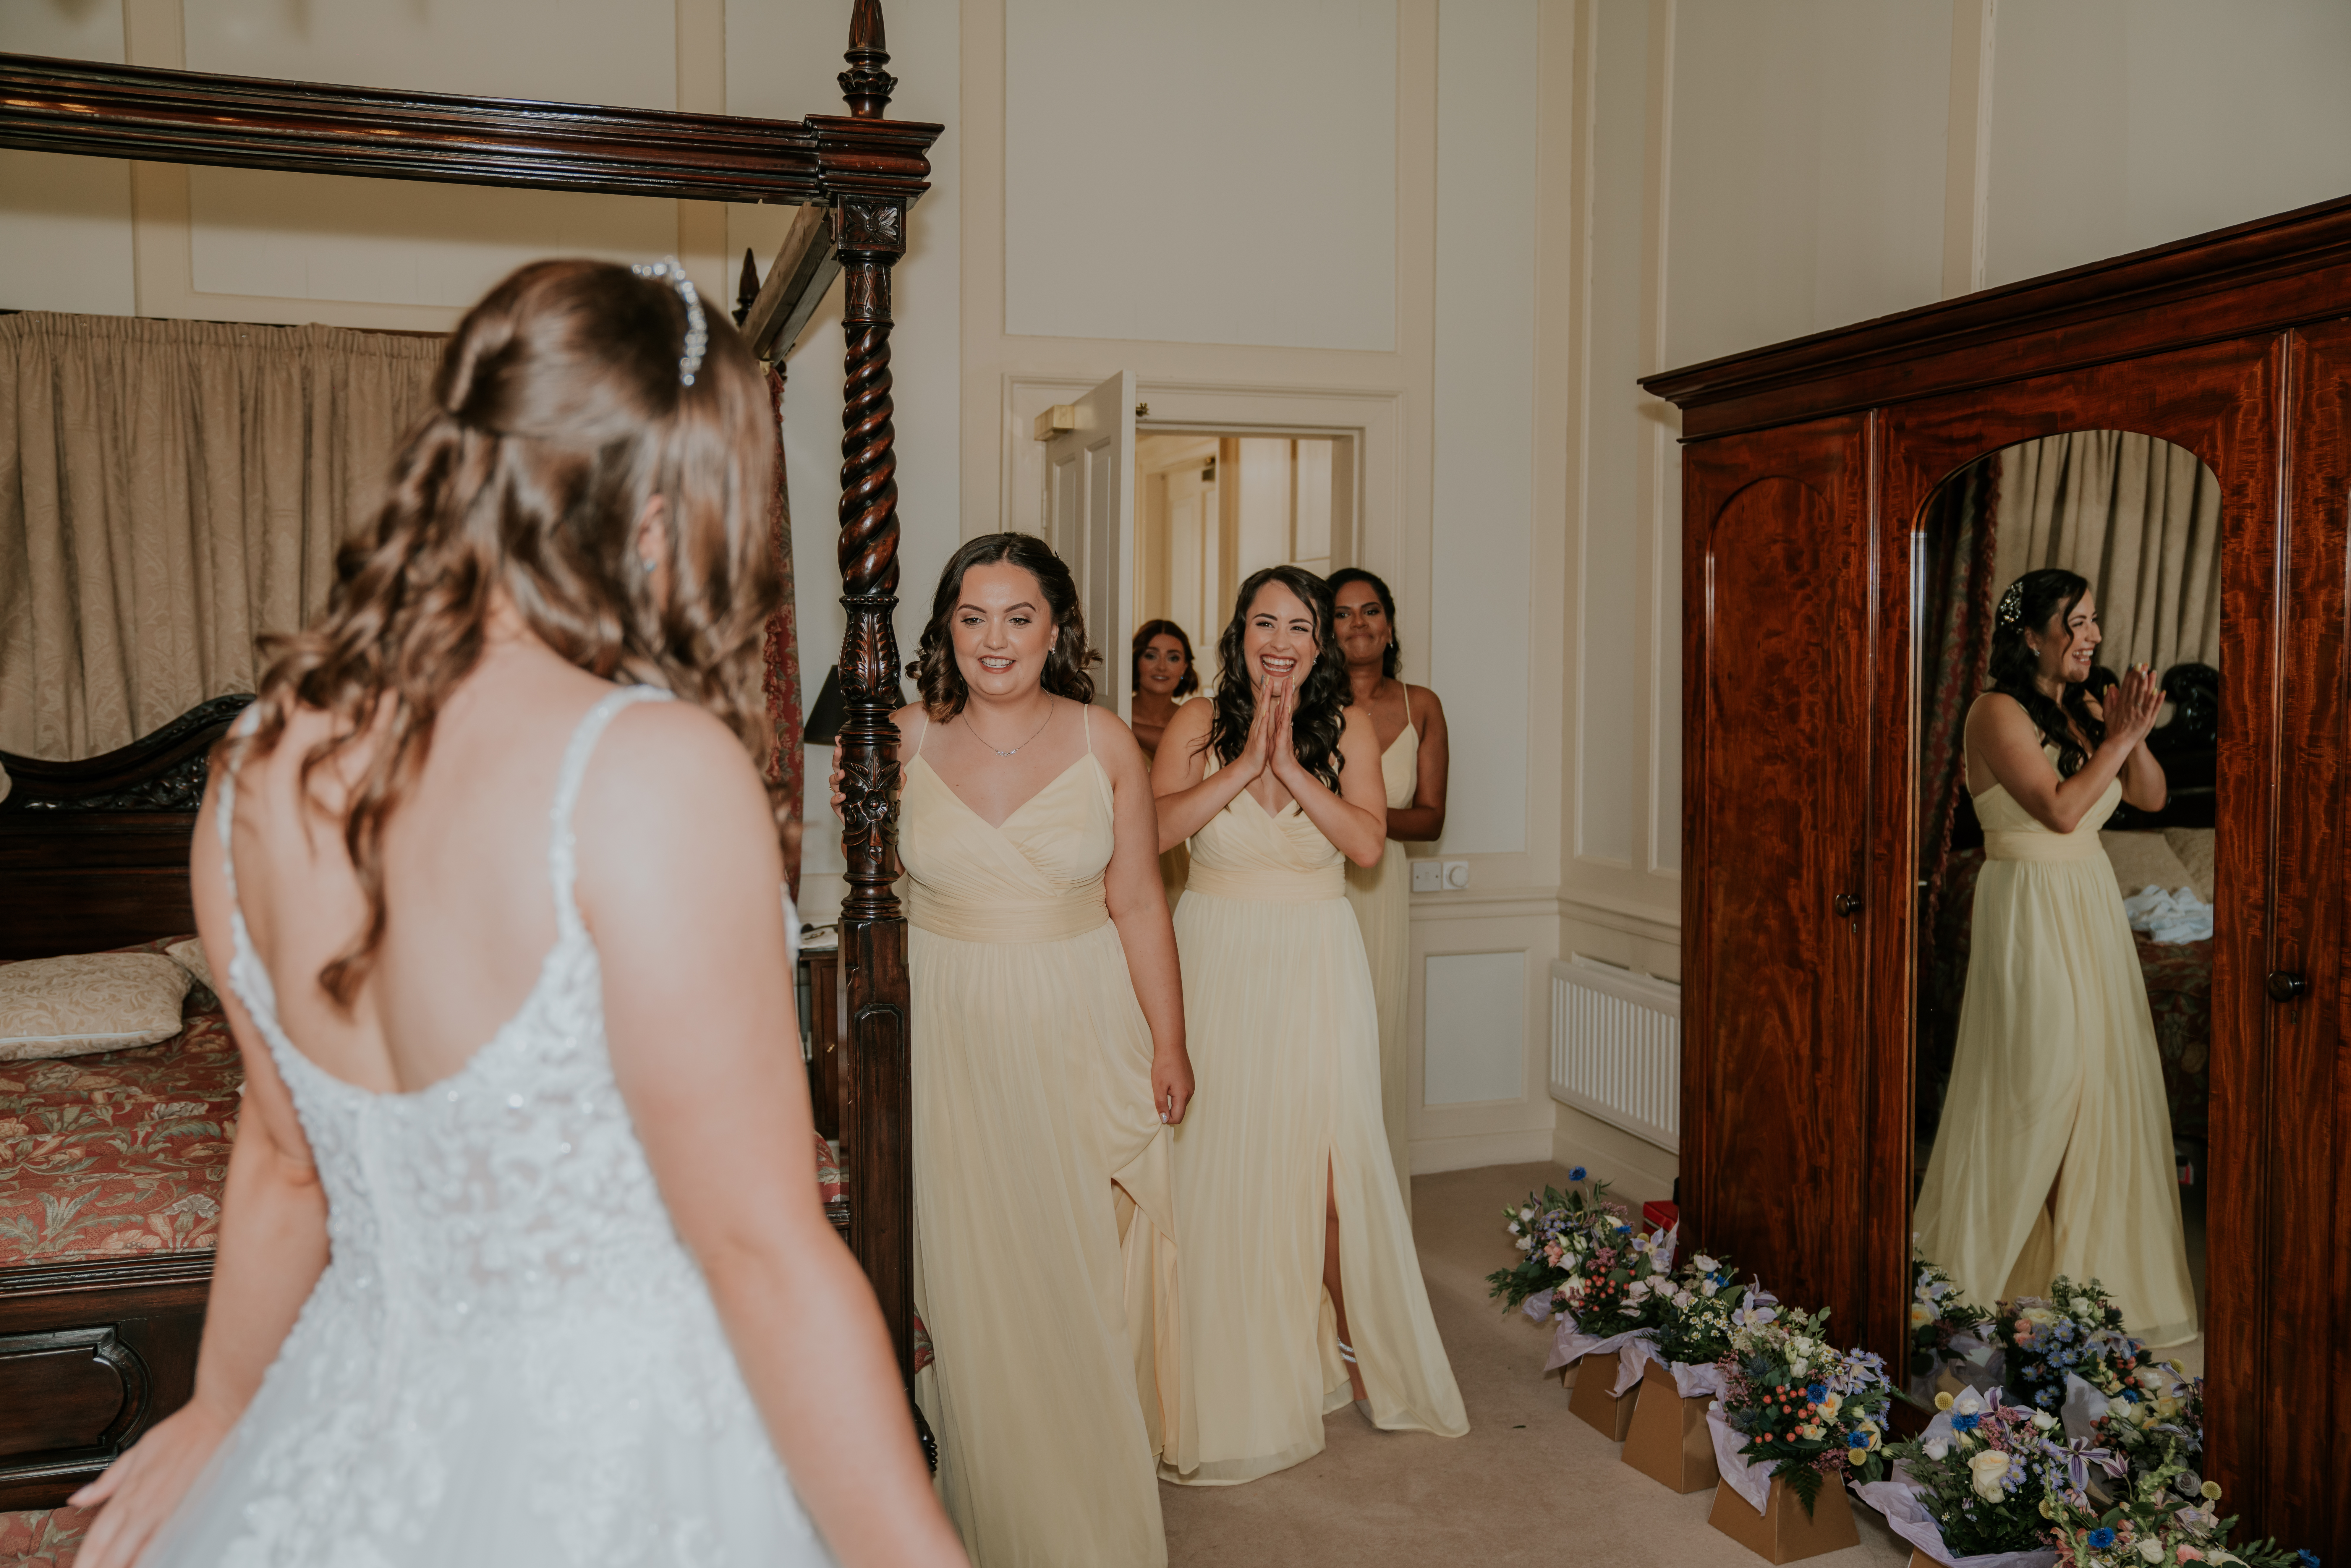 Bridesmaids see the bride in dress for first time